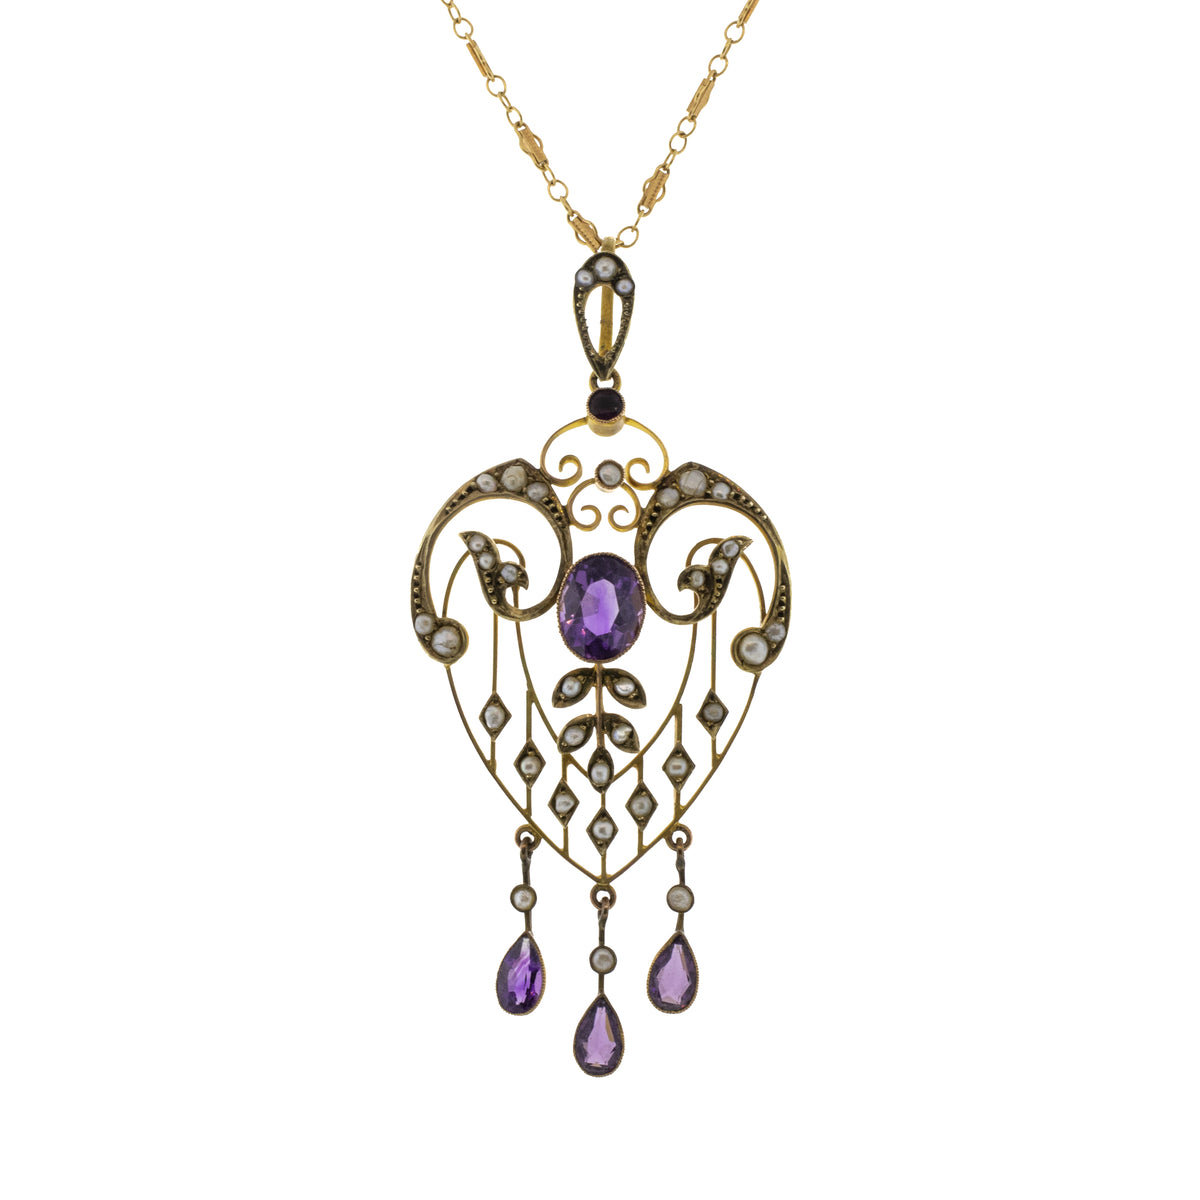 Edwardian Art Nouveau Pearl and Amethyst Heart Pendant and Chain